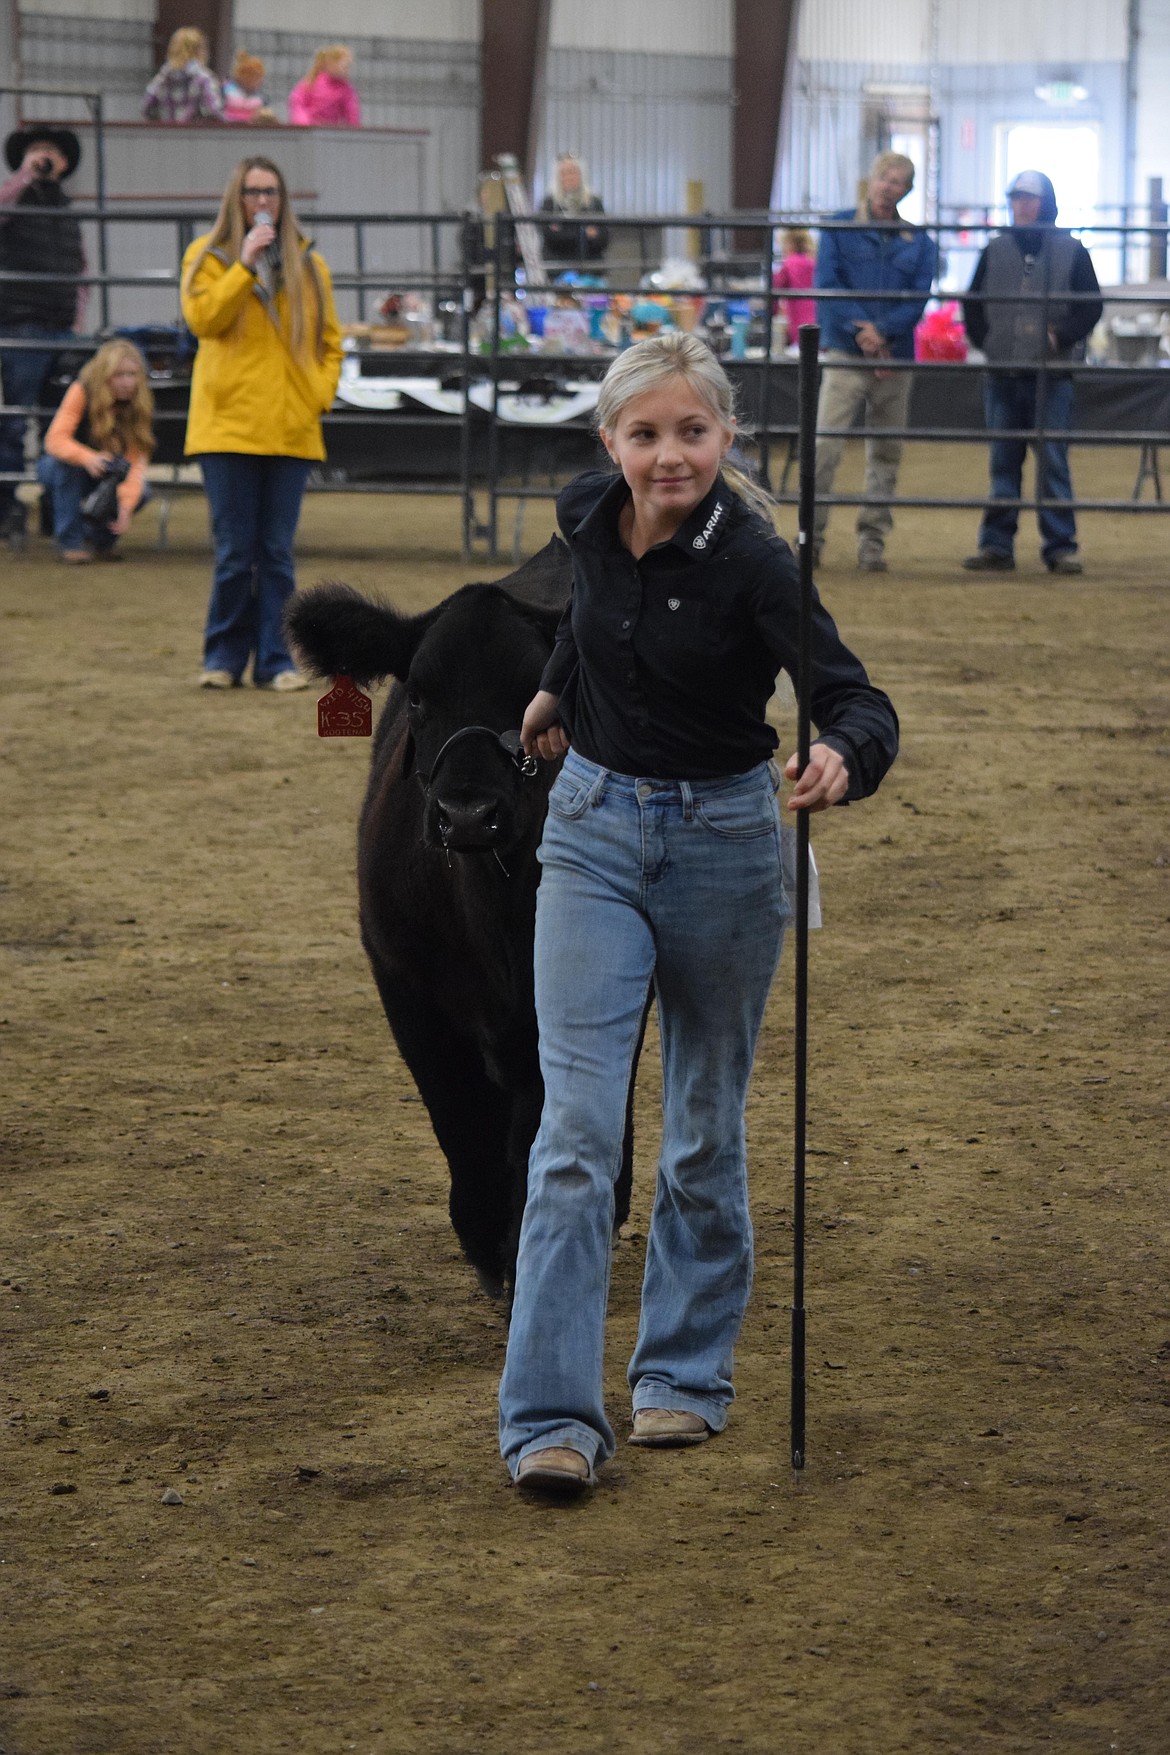 Kaylee Eider, 12, of Hayden, Idaho, leads her steer out of the show ring during the Western Showcase Jackpot show at the Grant County Fairgrounds last Saturday.